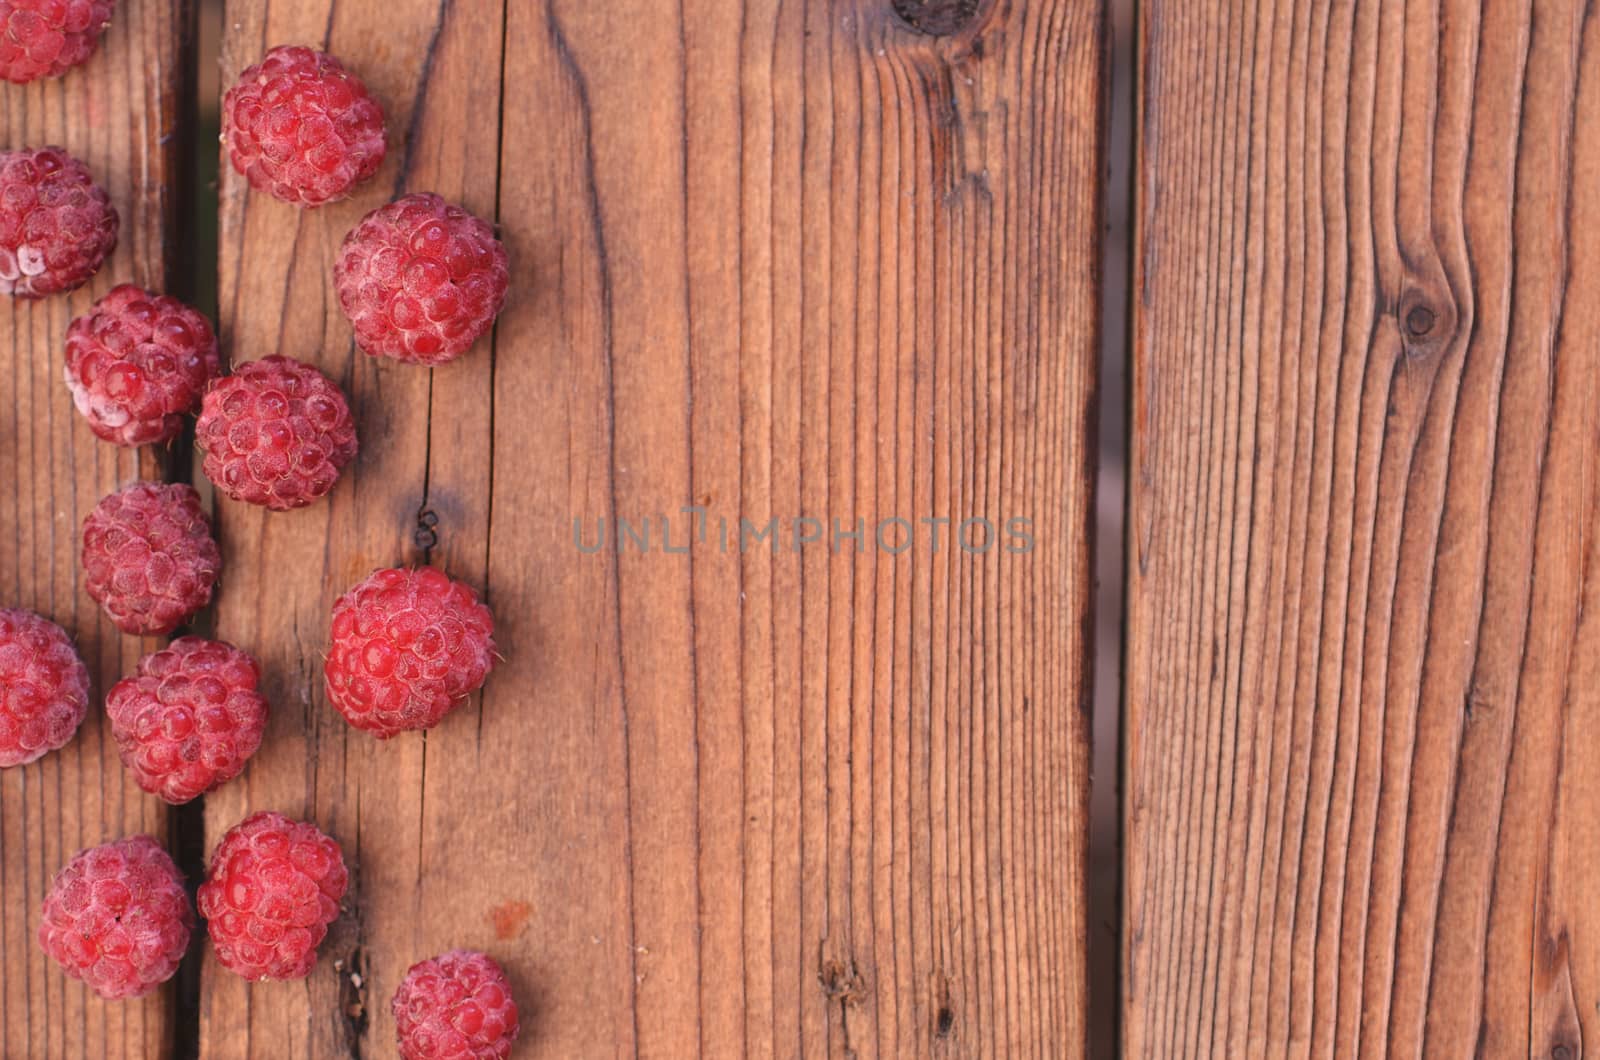 On a wooden background, raspberry is spread out on the left, a photo from above